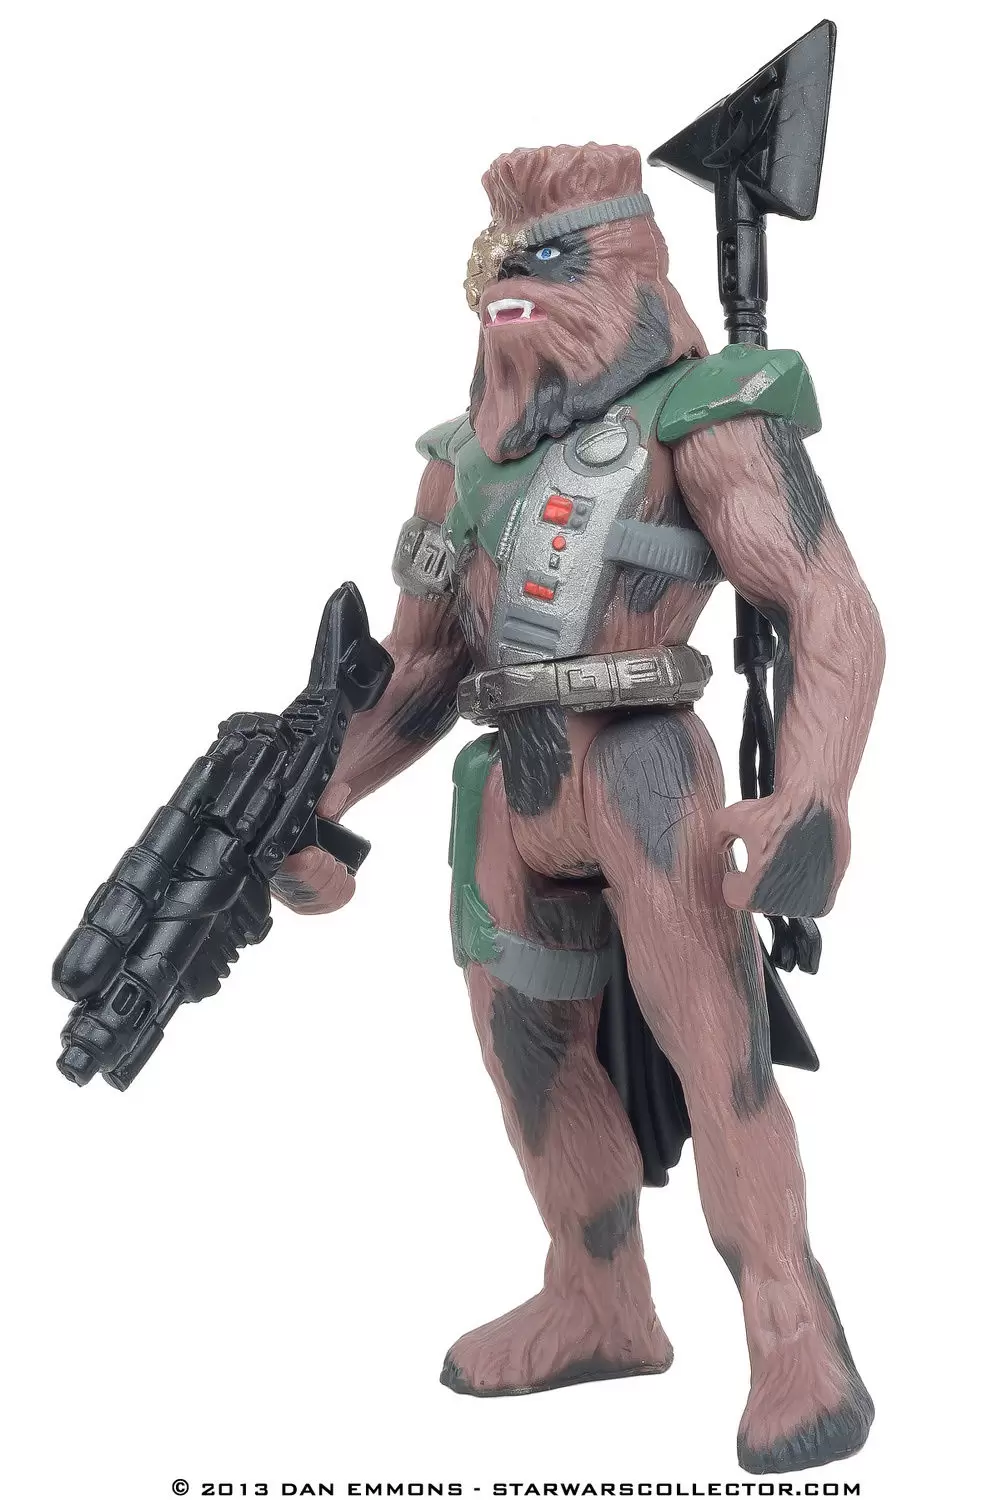 Shadows of the Empire - Chewbacca in Bounty Hunter Disguise